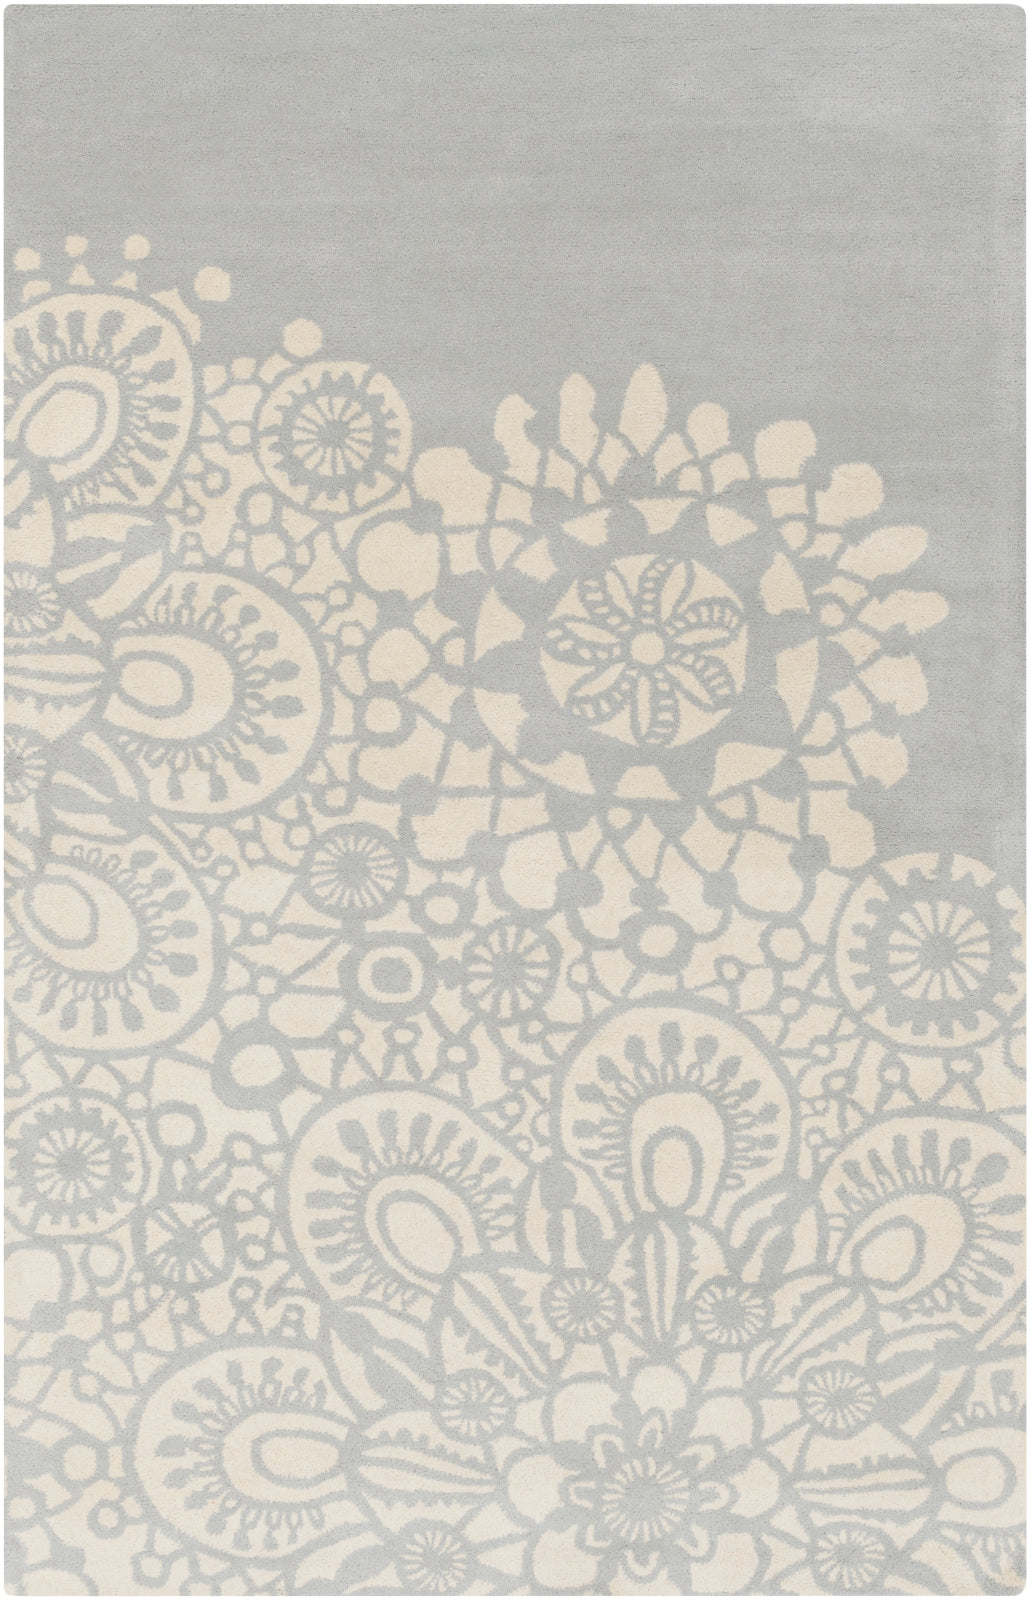 Surya Alhambra ALH-5025 Area Rug by Kate Spain main image